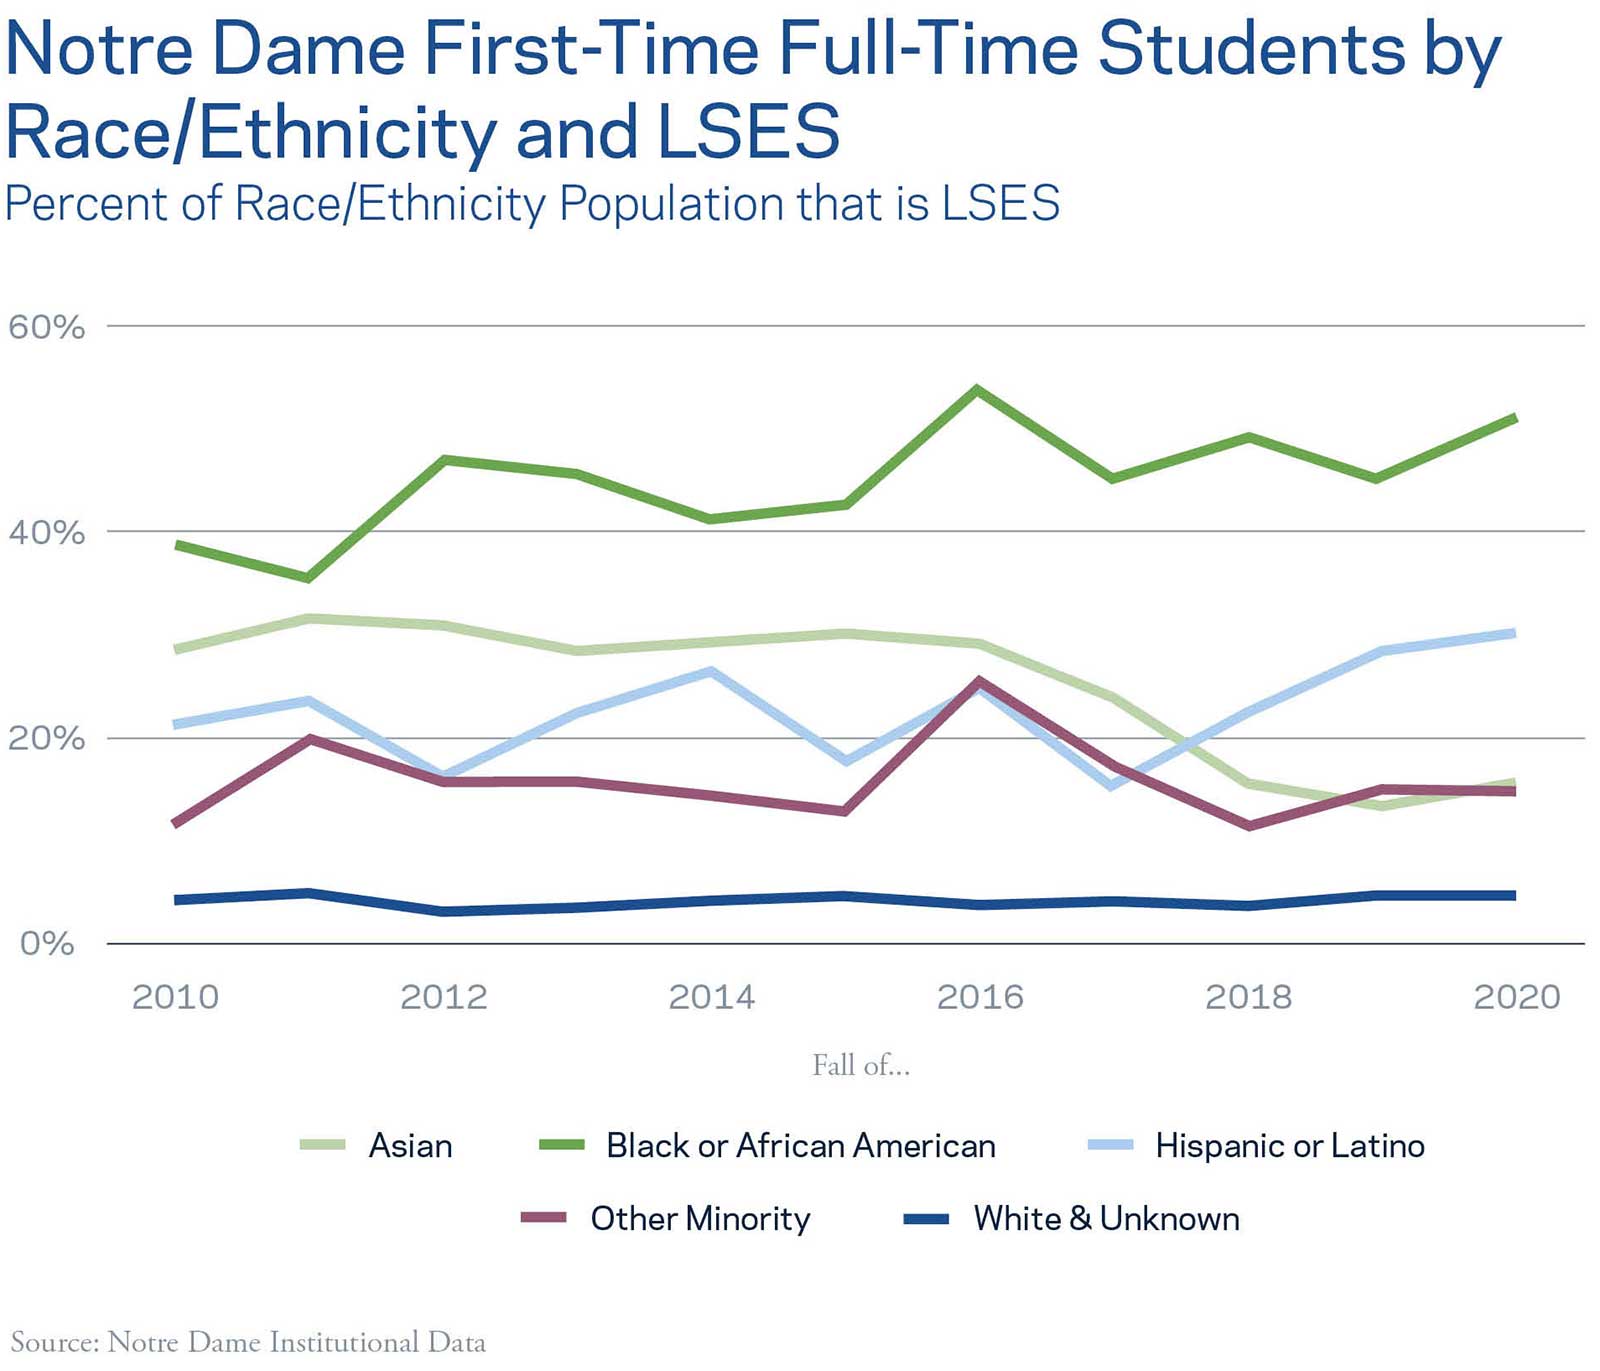 Notre Dame First-Time Full-Time Students by Race/Ethnicity and LSES - Percent of Race/Ethnicity Population that is LSES